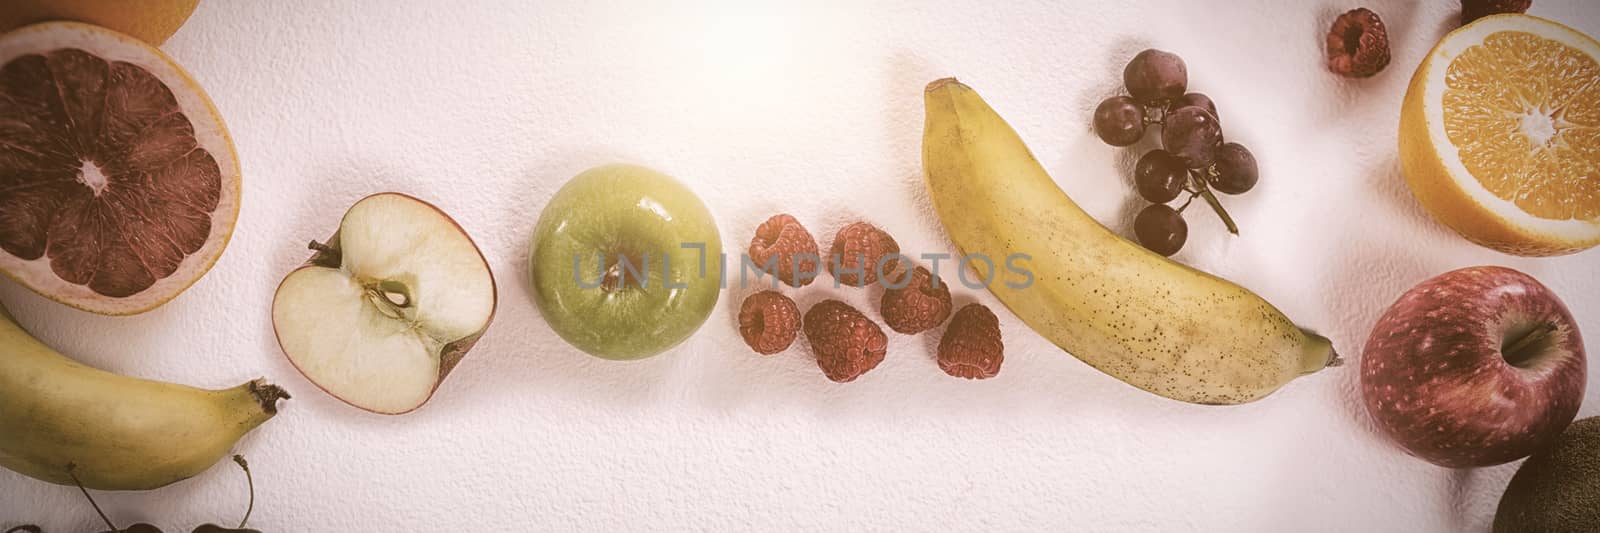 Various types of fruits arranged on white background by Wavebreakmedia